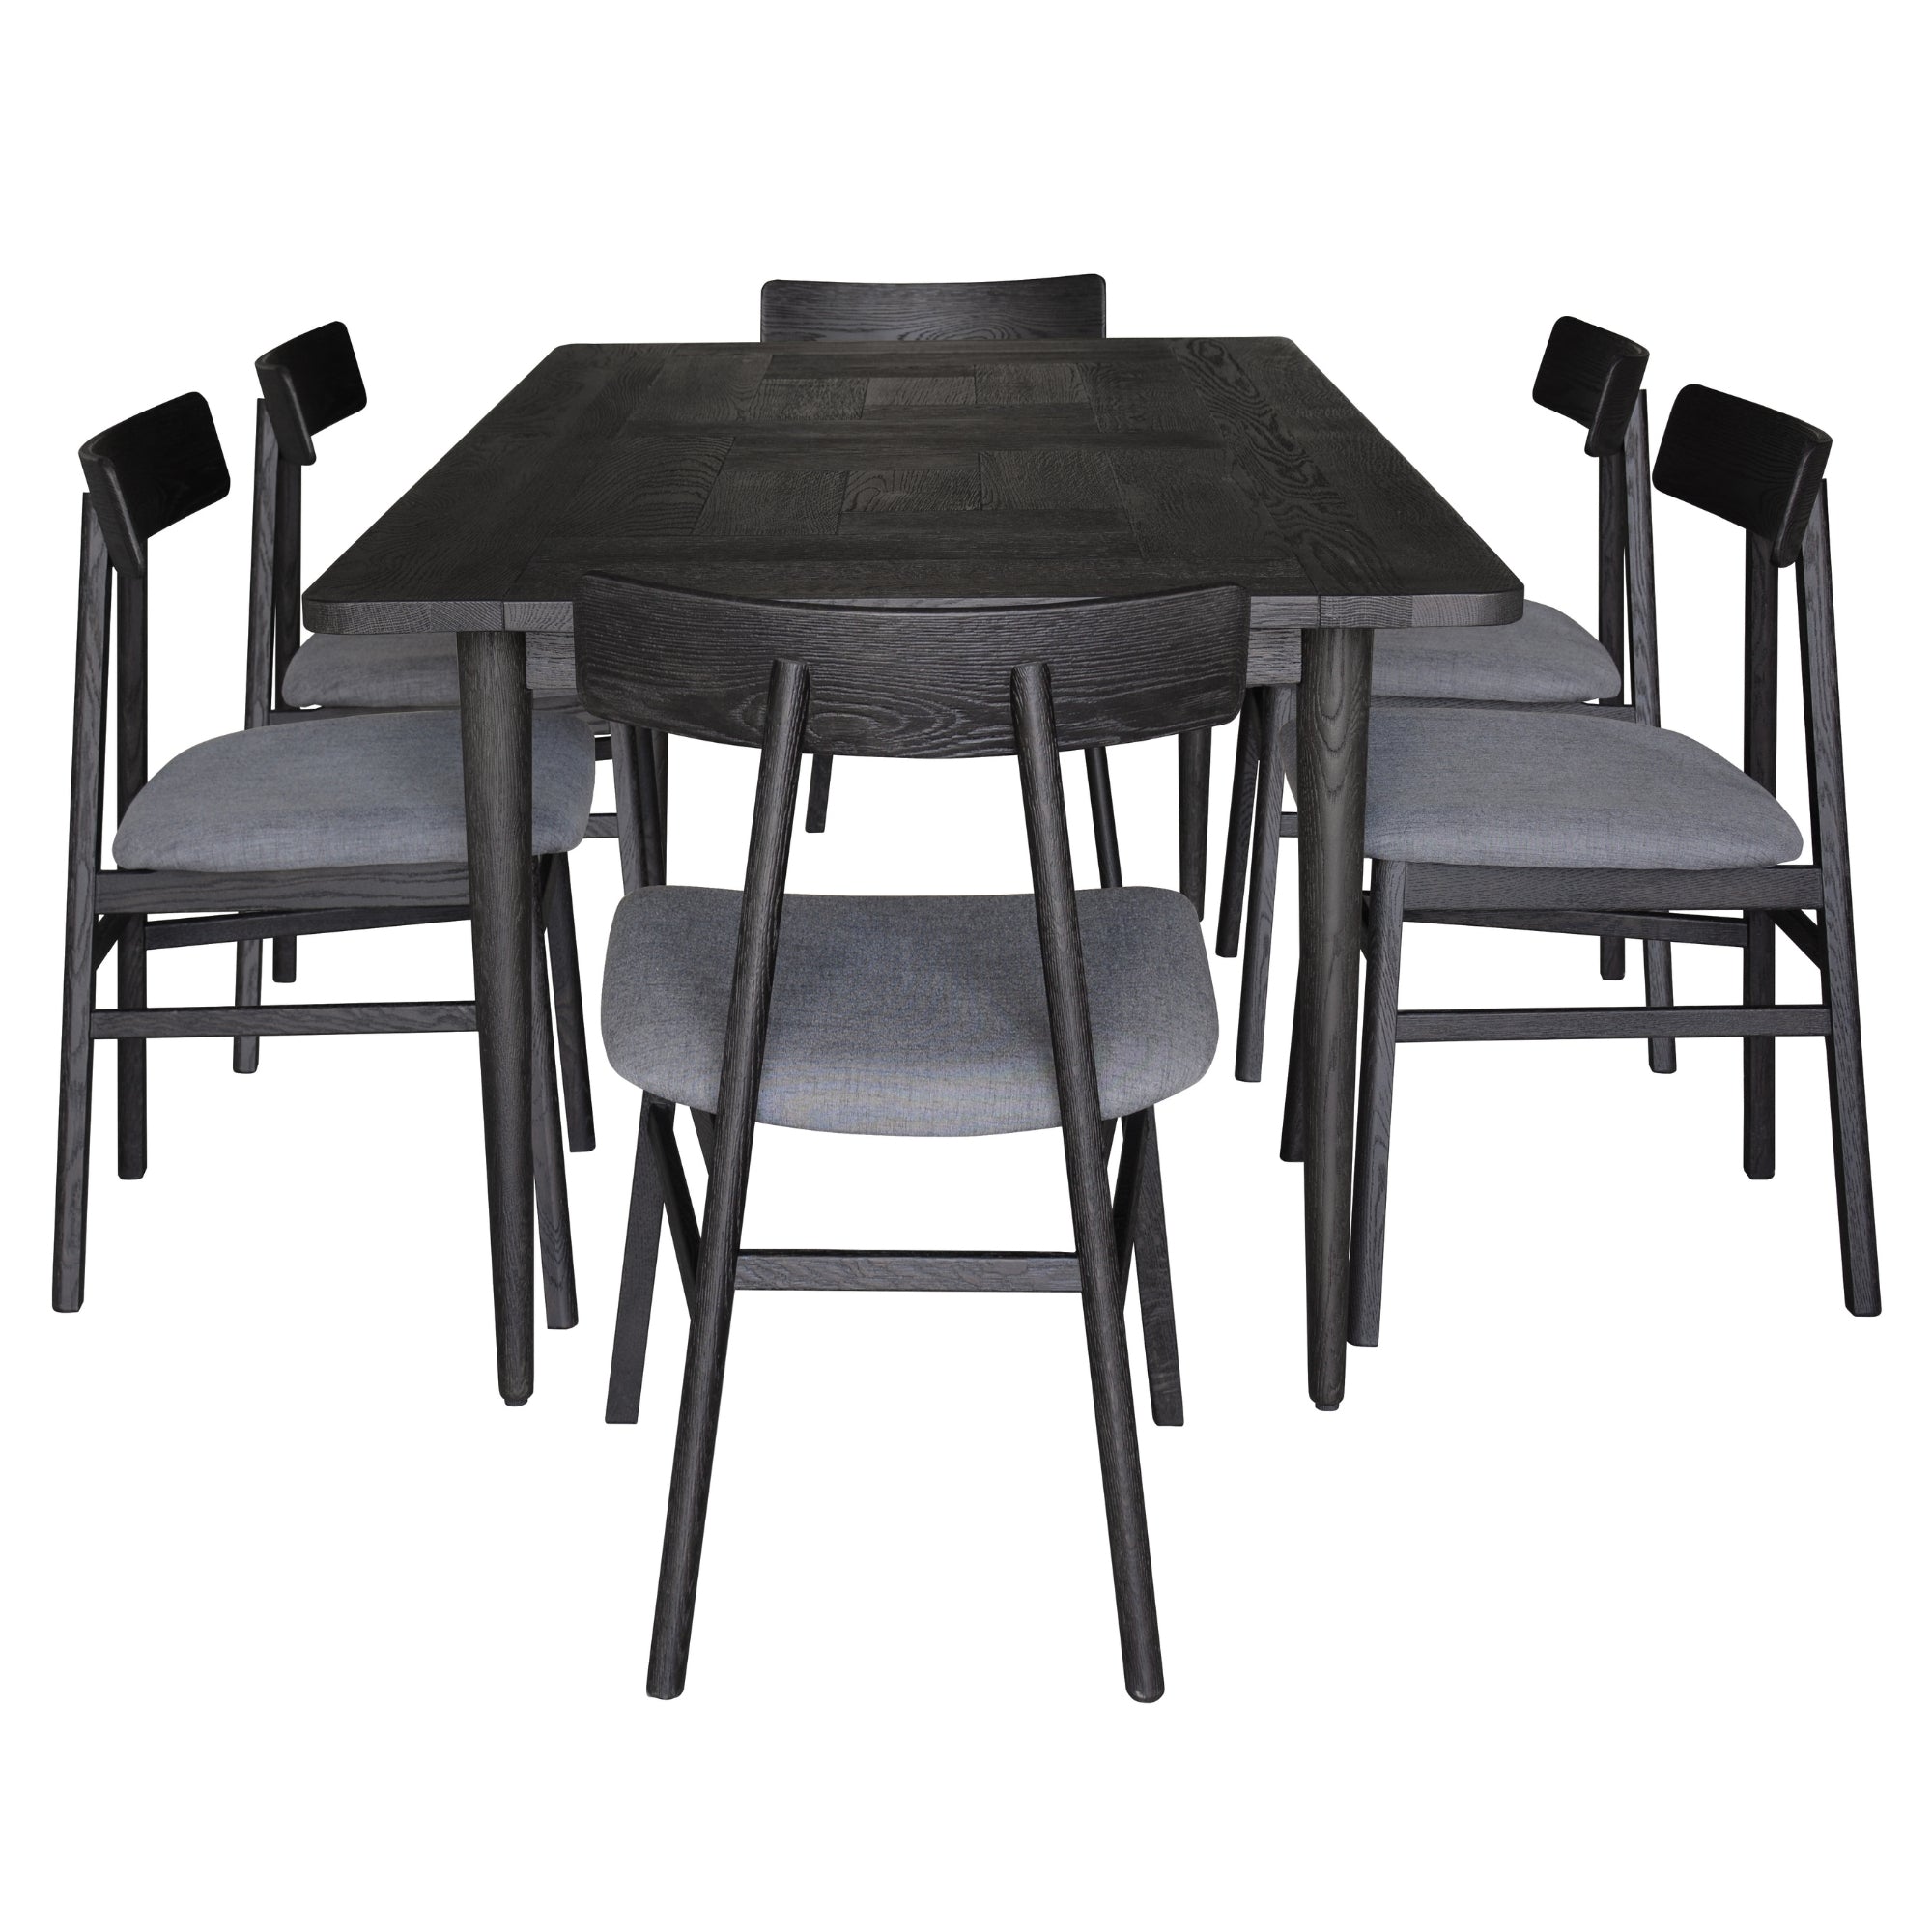 7pc Solid Oak Dining Set w/ Fabric Seats, 180cm Table